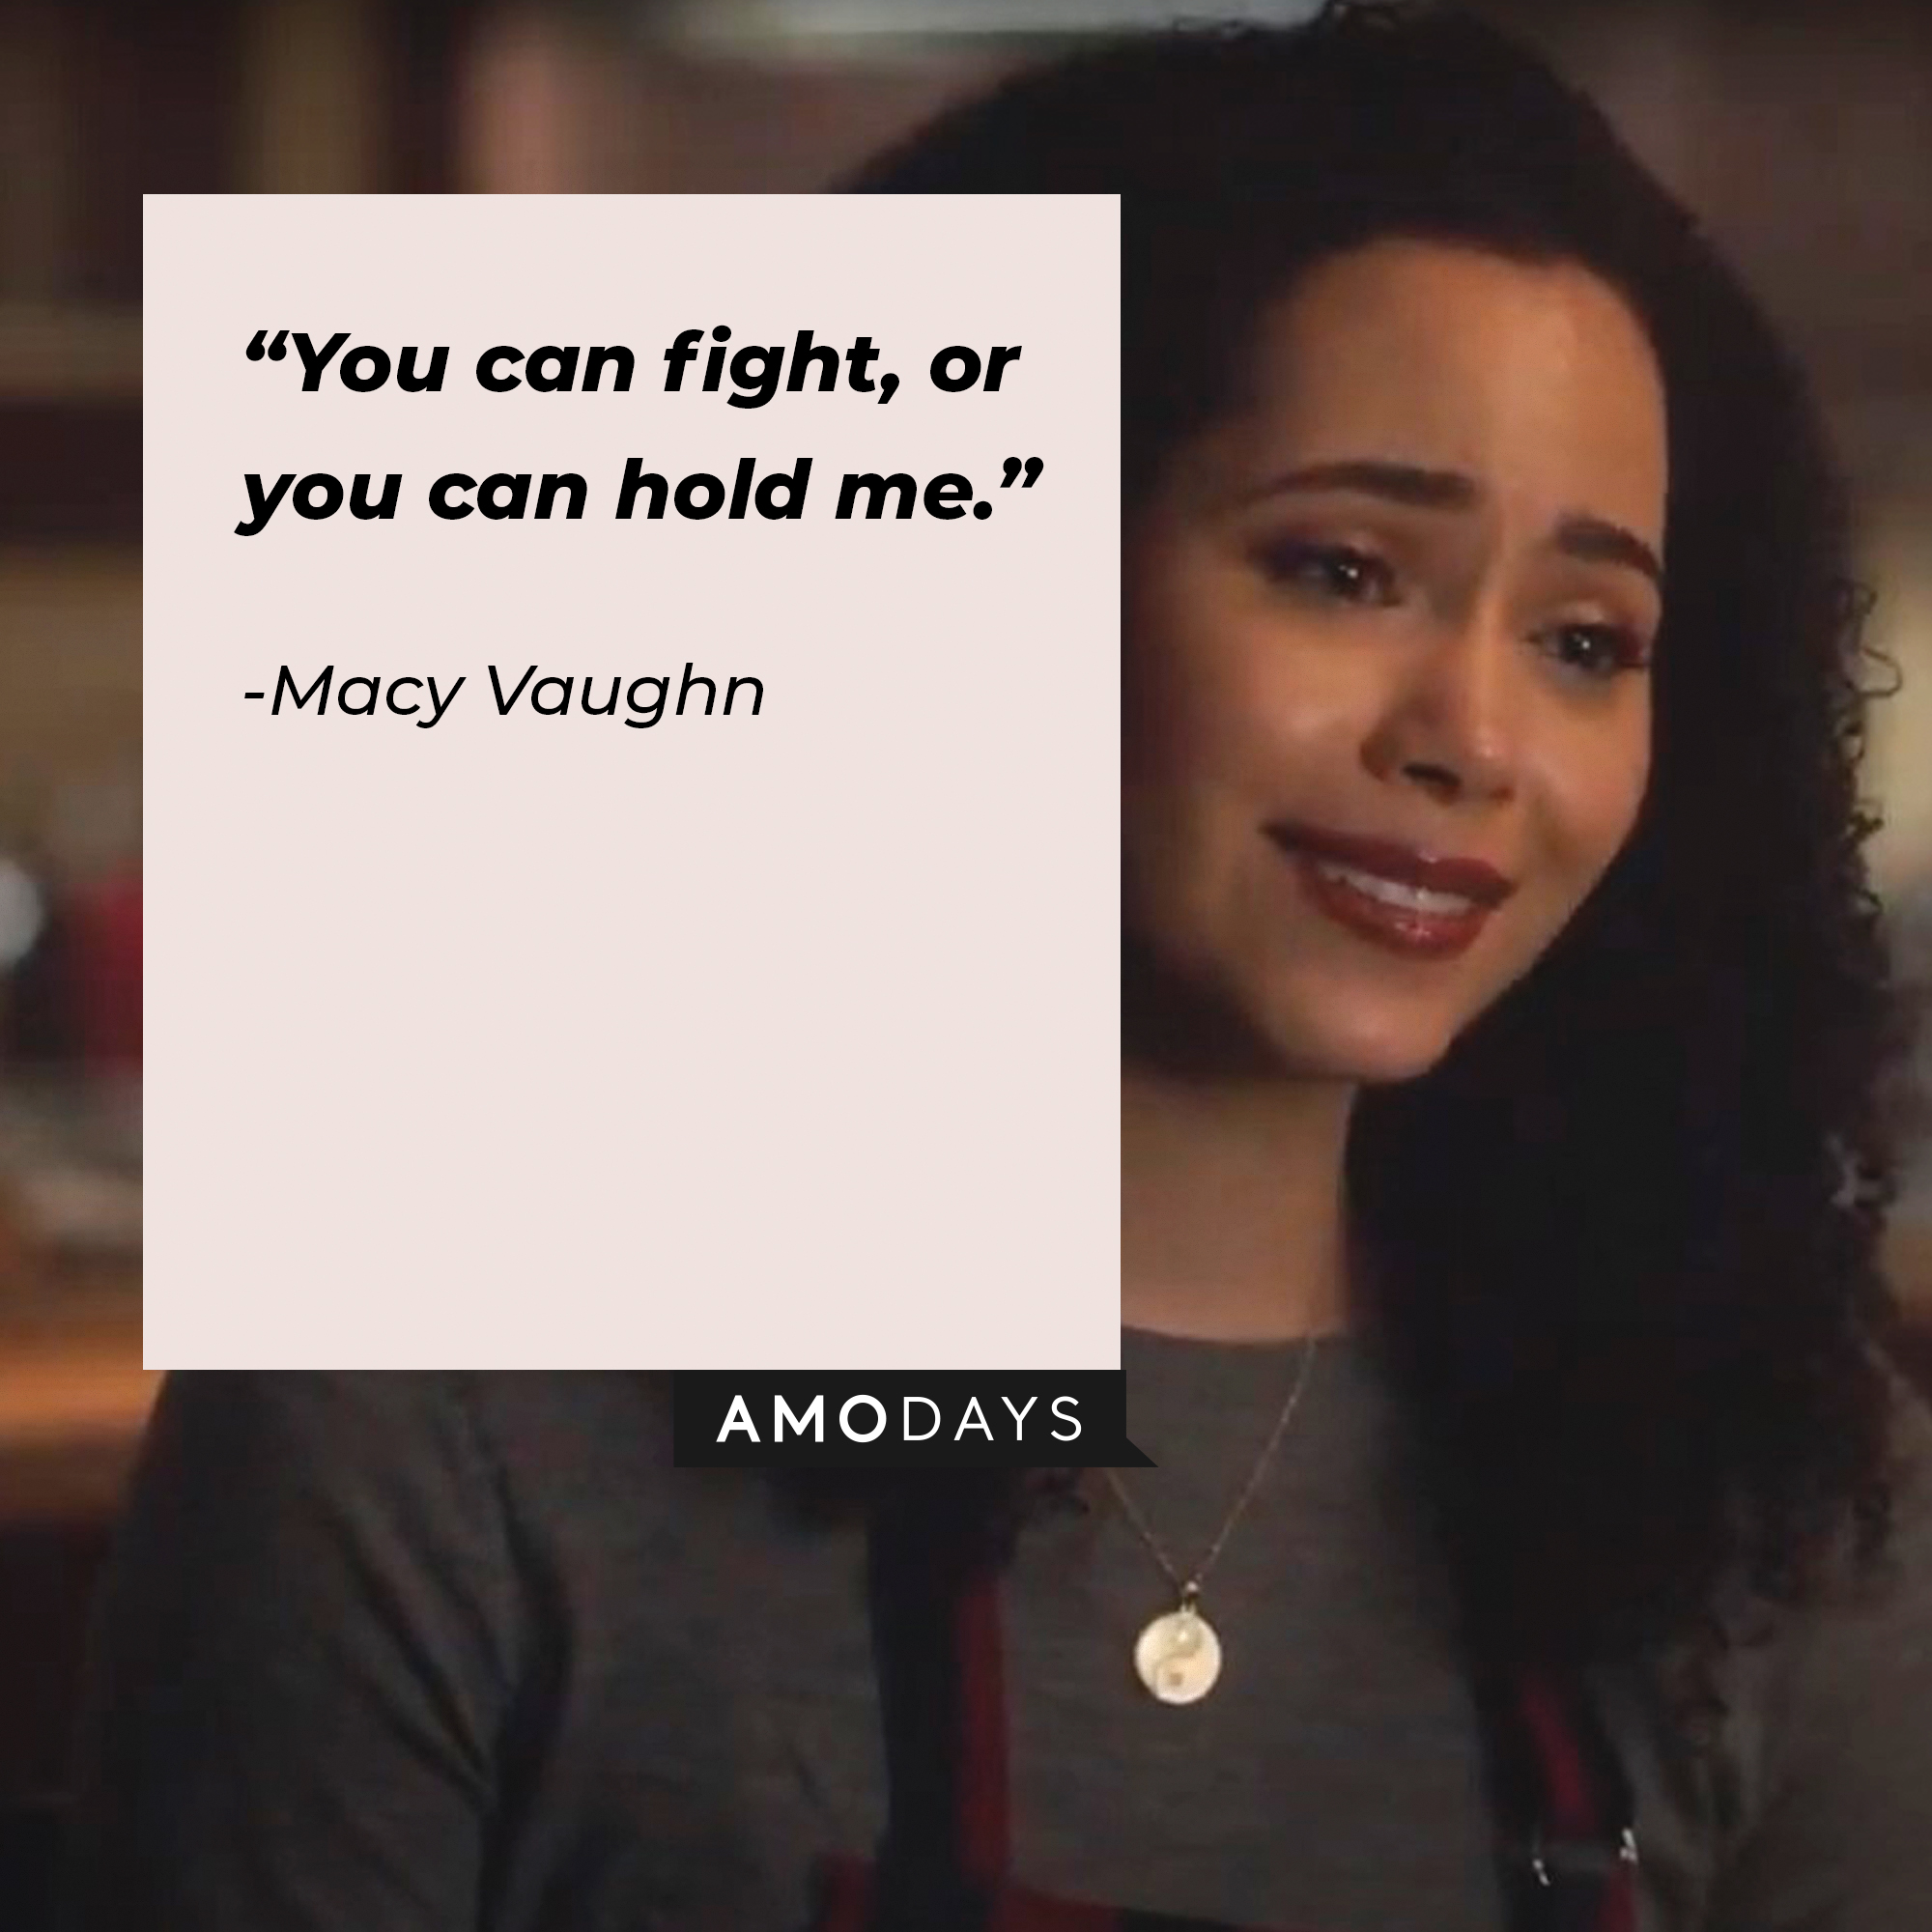 An image of Macy Vaughn with her quote: “You can fight, or you can hold me.” │Source: facebook.com/charmedtv